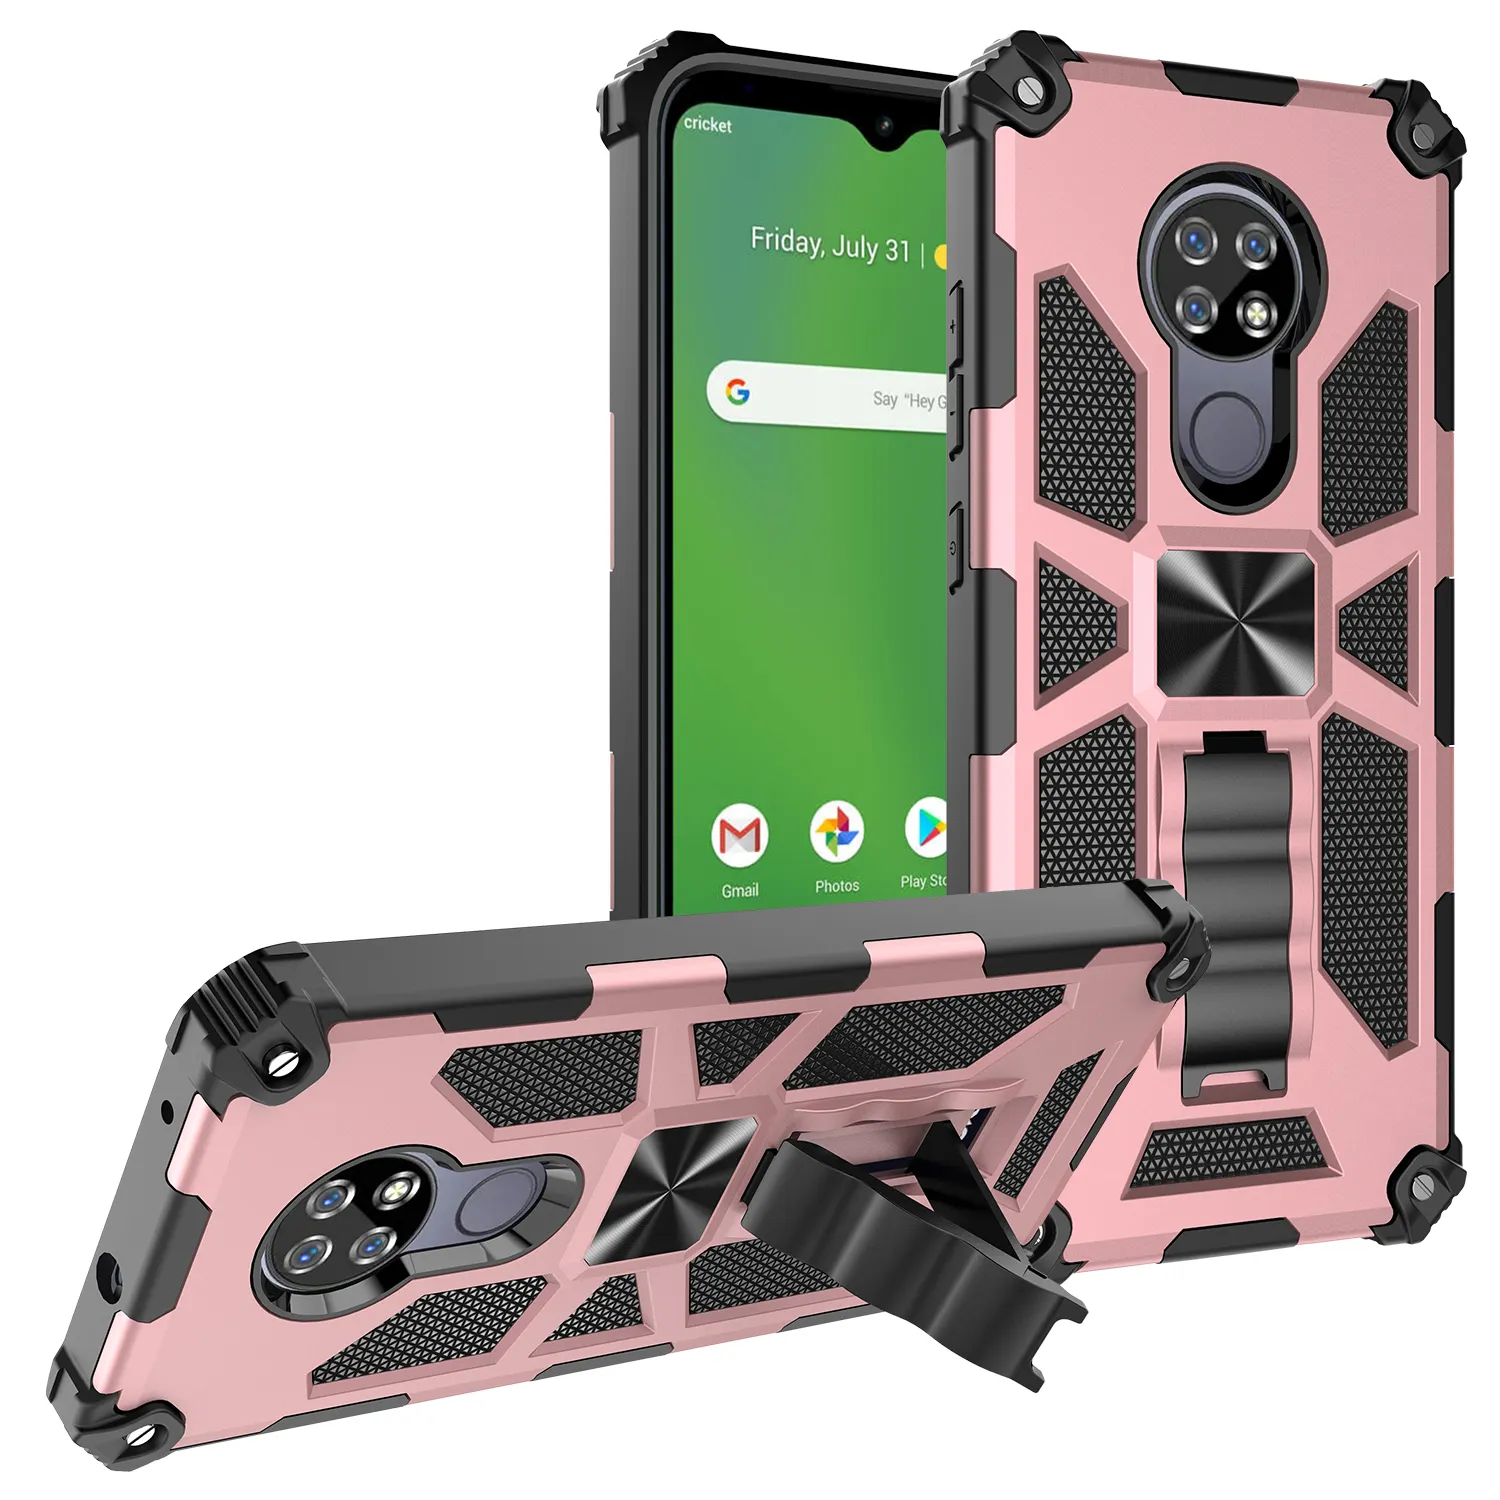 Case for AT&T Maestro Max 2021 / Cricket Ovation 2 Full-Body Protective Cellphone Cover Mobile Accessories